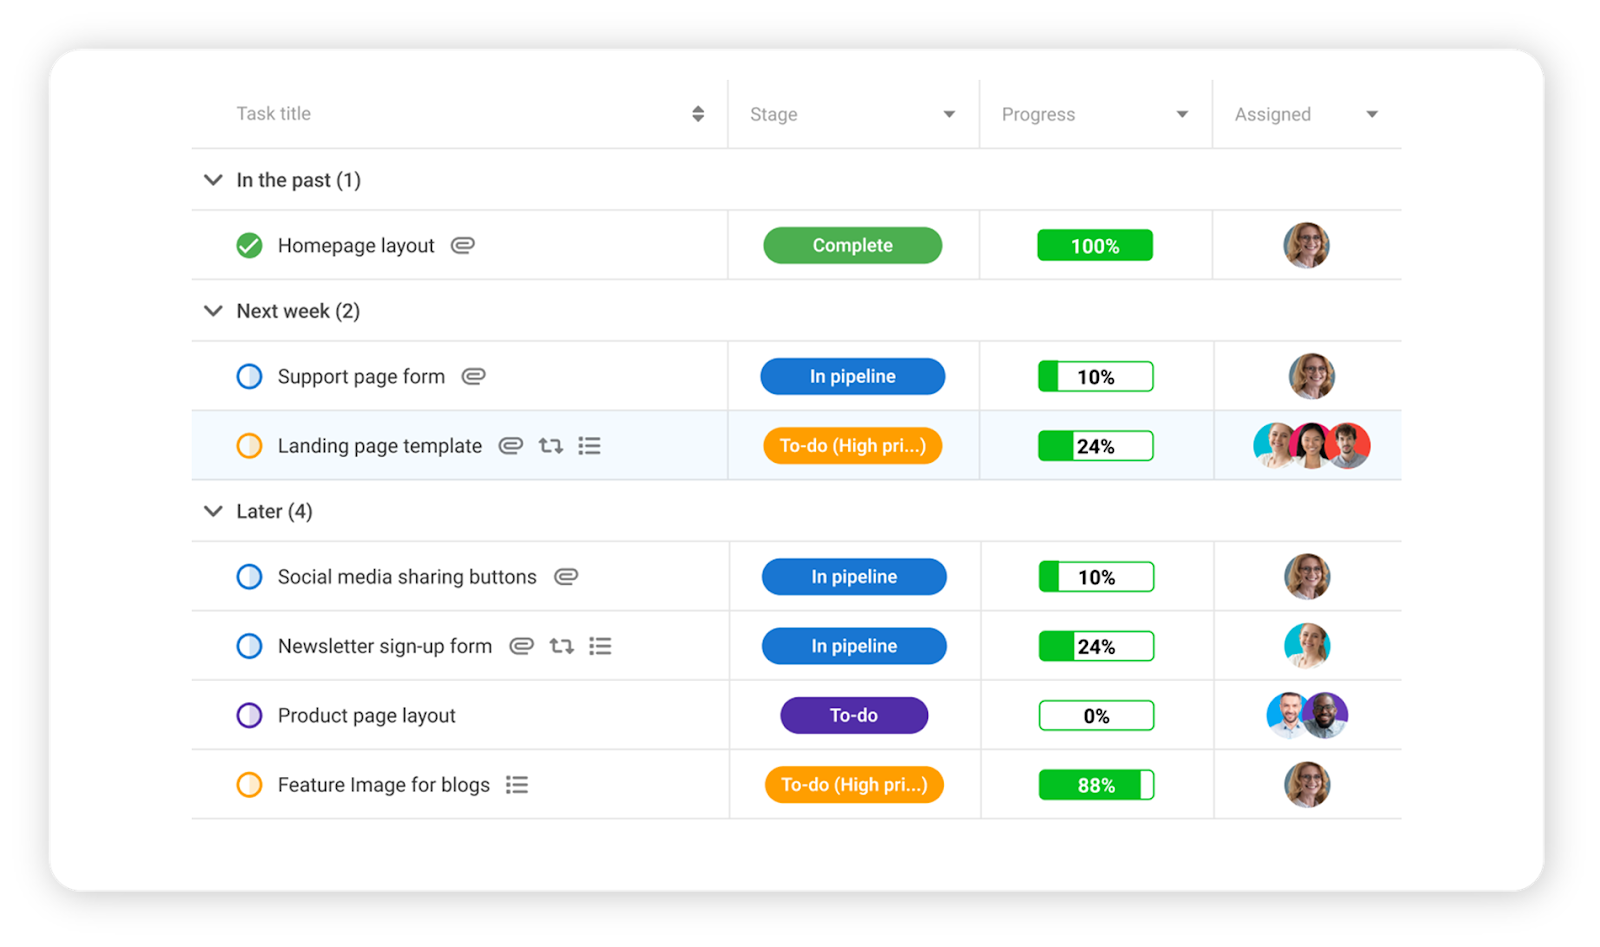 Proofhub interface with tasks separated by stages